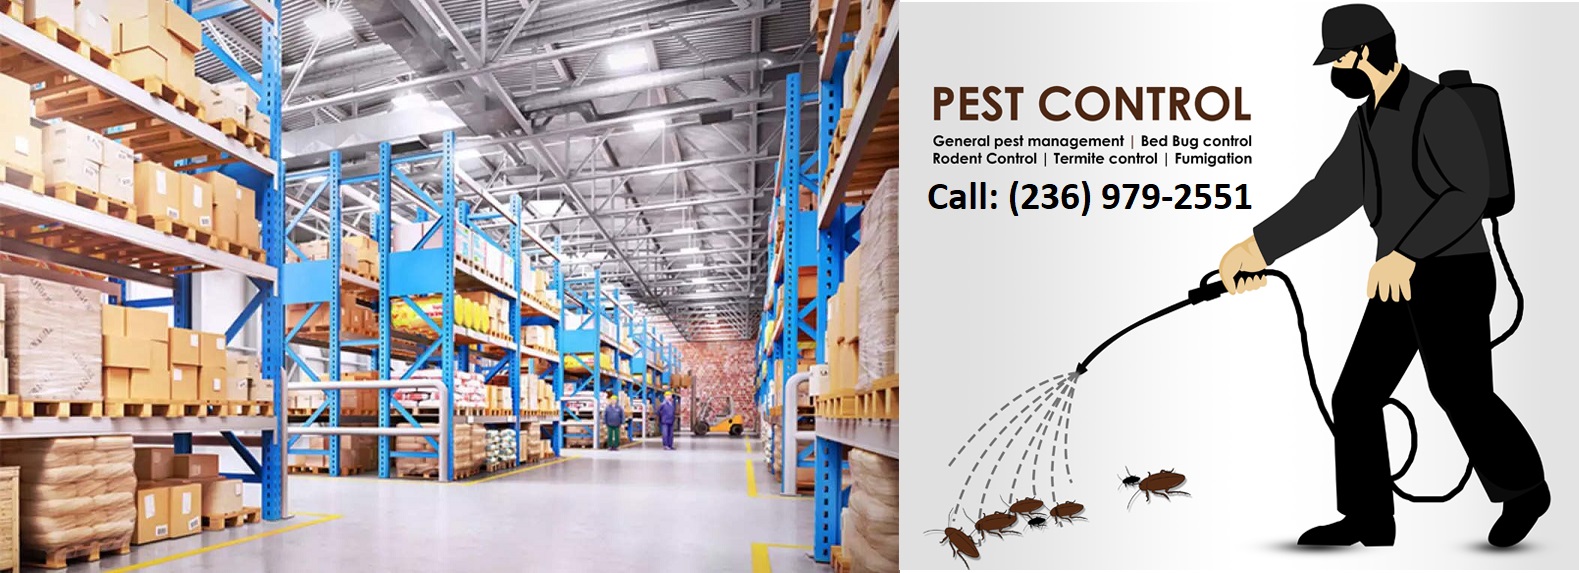 Warehouses Pest Removal Services, Warehouses Pest Removal Services